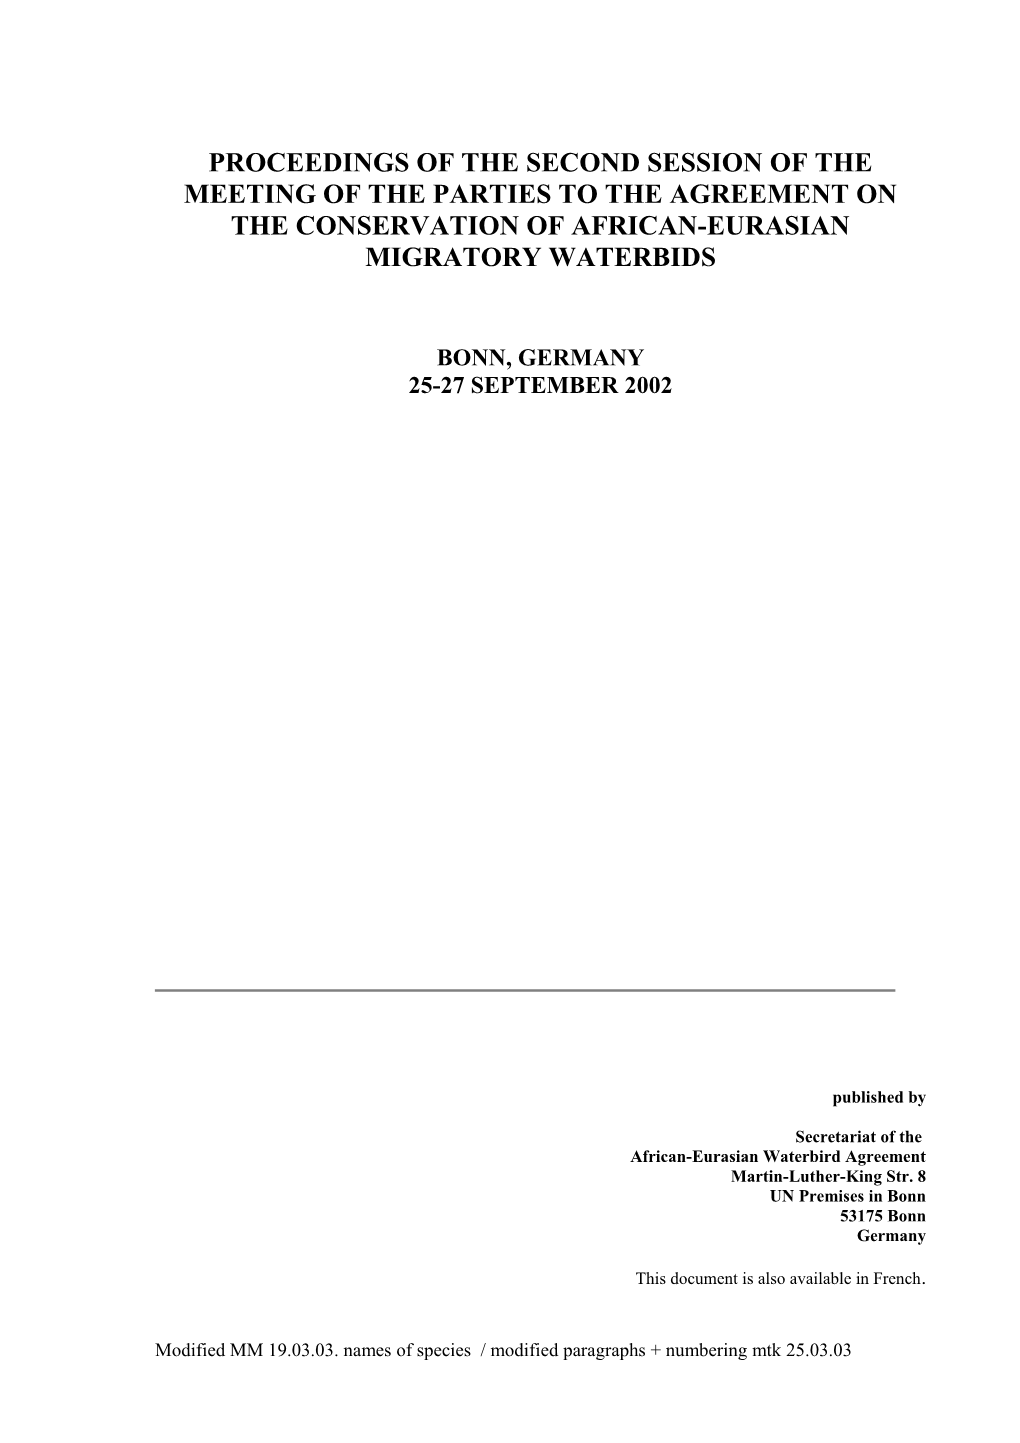 Proceedings of the Second Session of the Meeting of the Parties to the Agreement on The